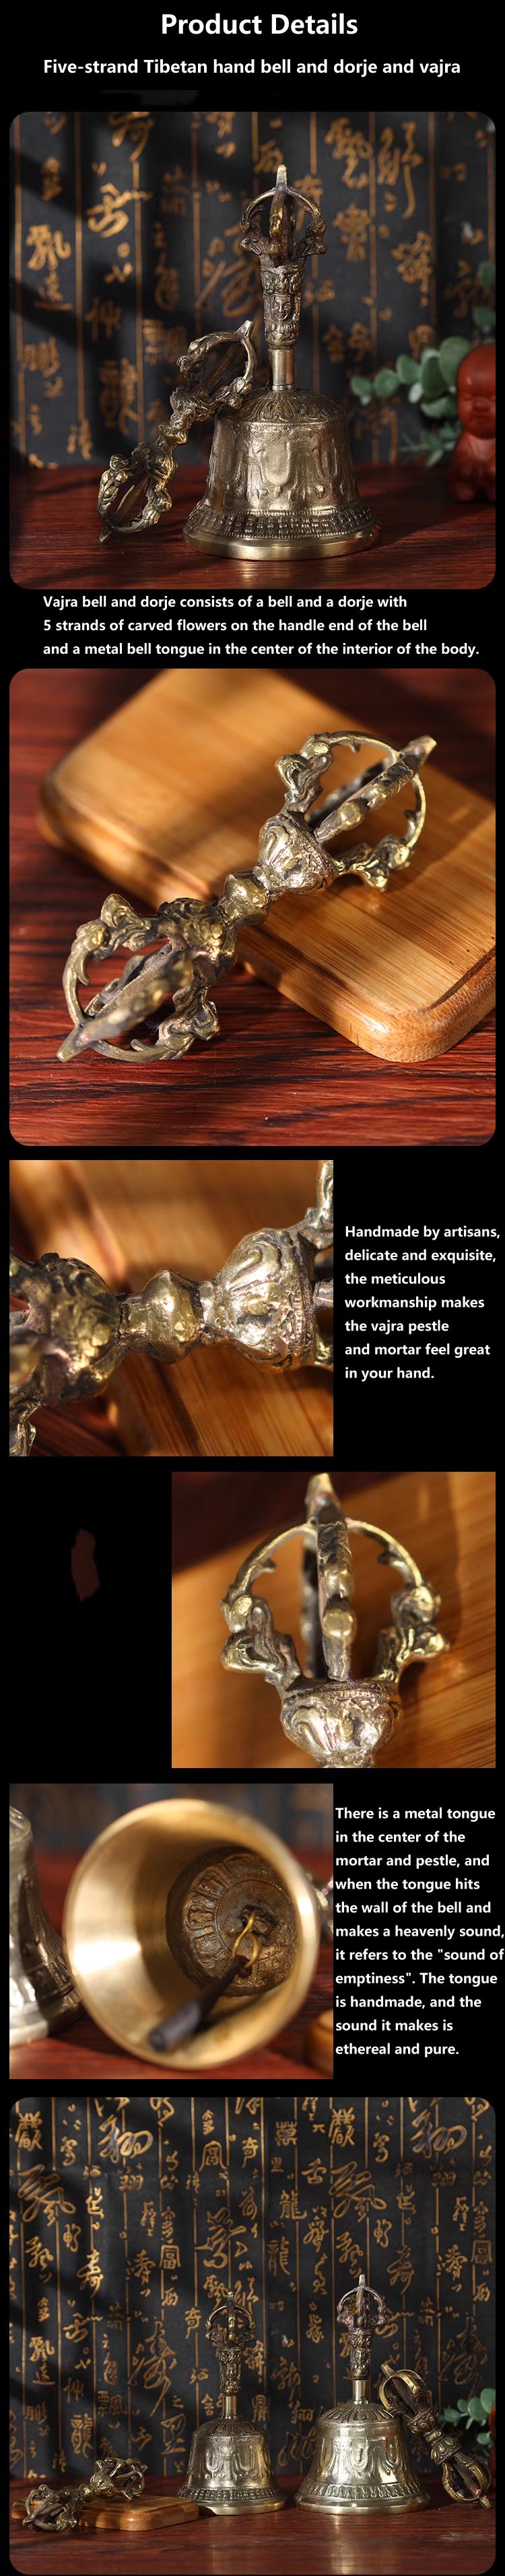 Five-strand Carving Tibetan Hanging Bell and Dorje Set, Handmade of White Bronze for Sale, Product details introduction -2